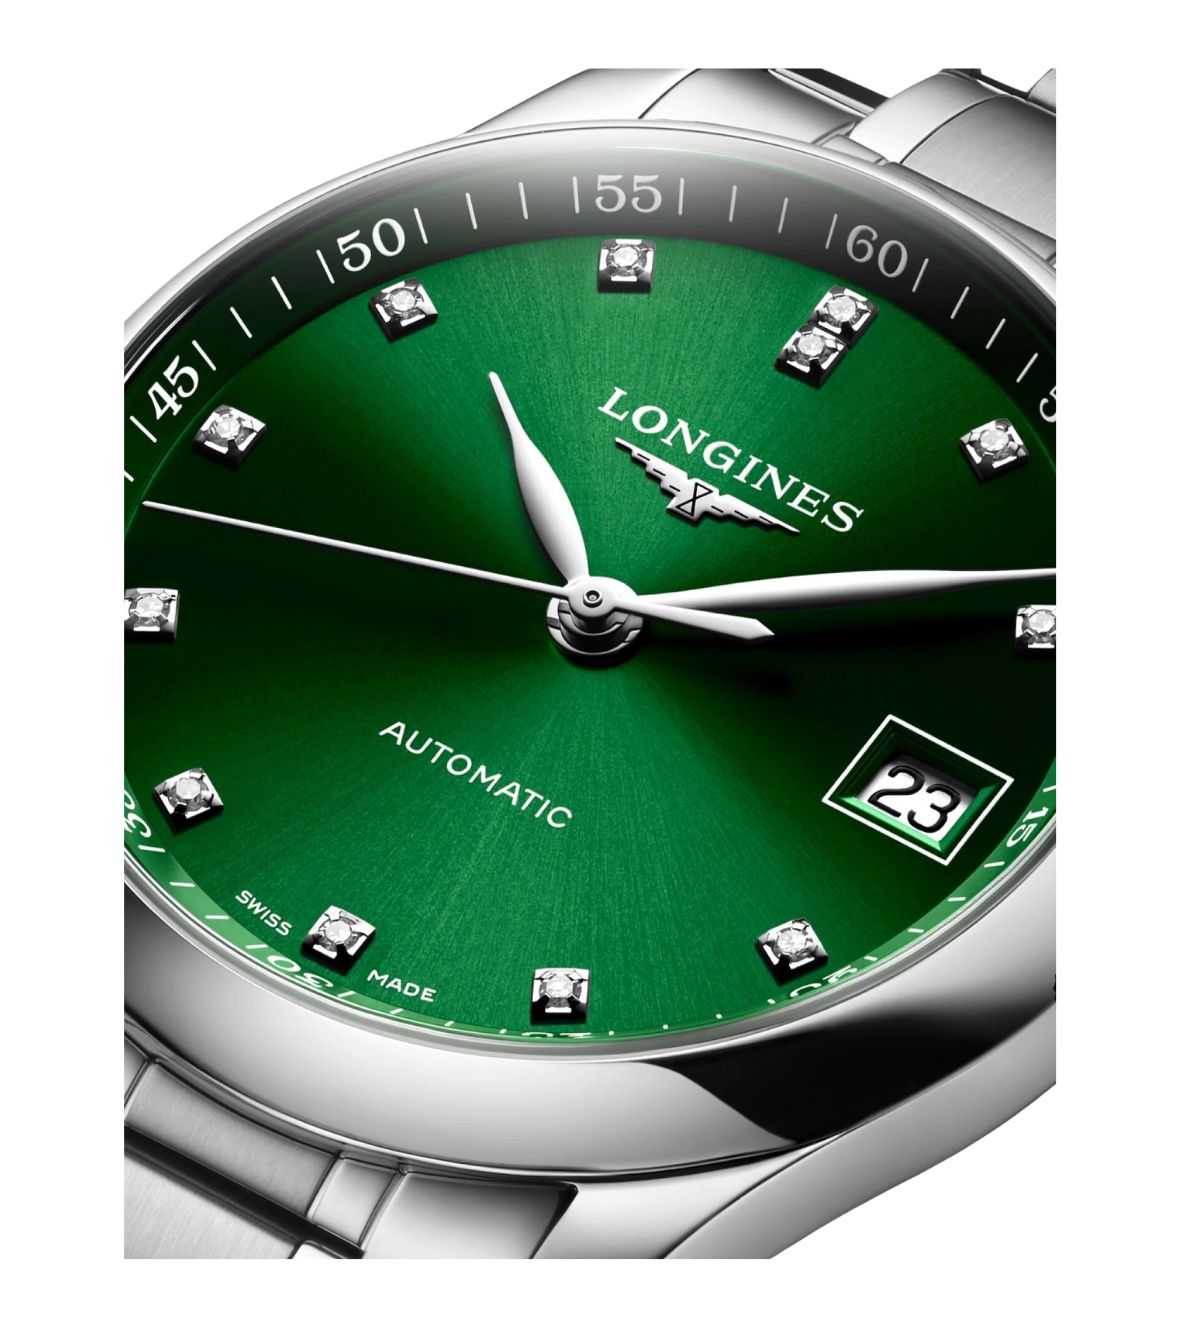 The Longines Master Collection L23574996